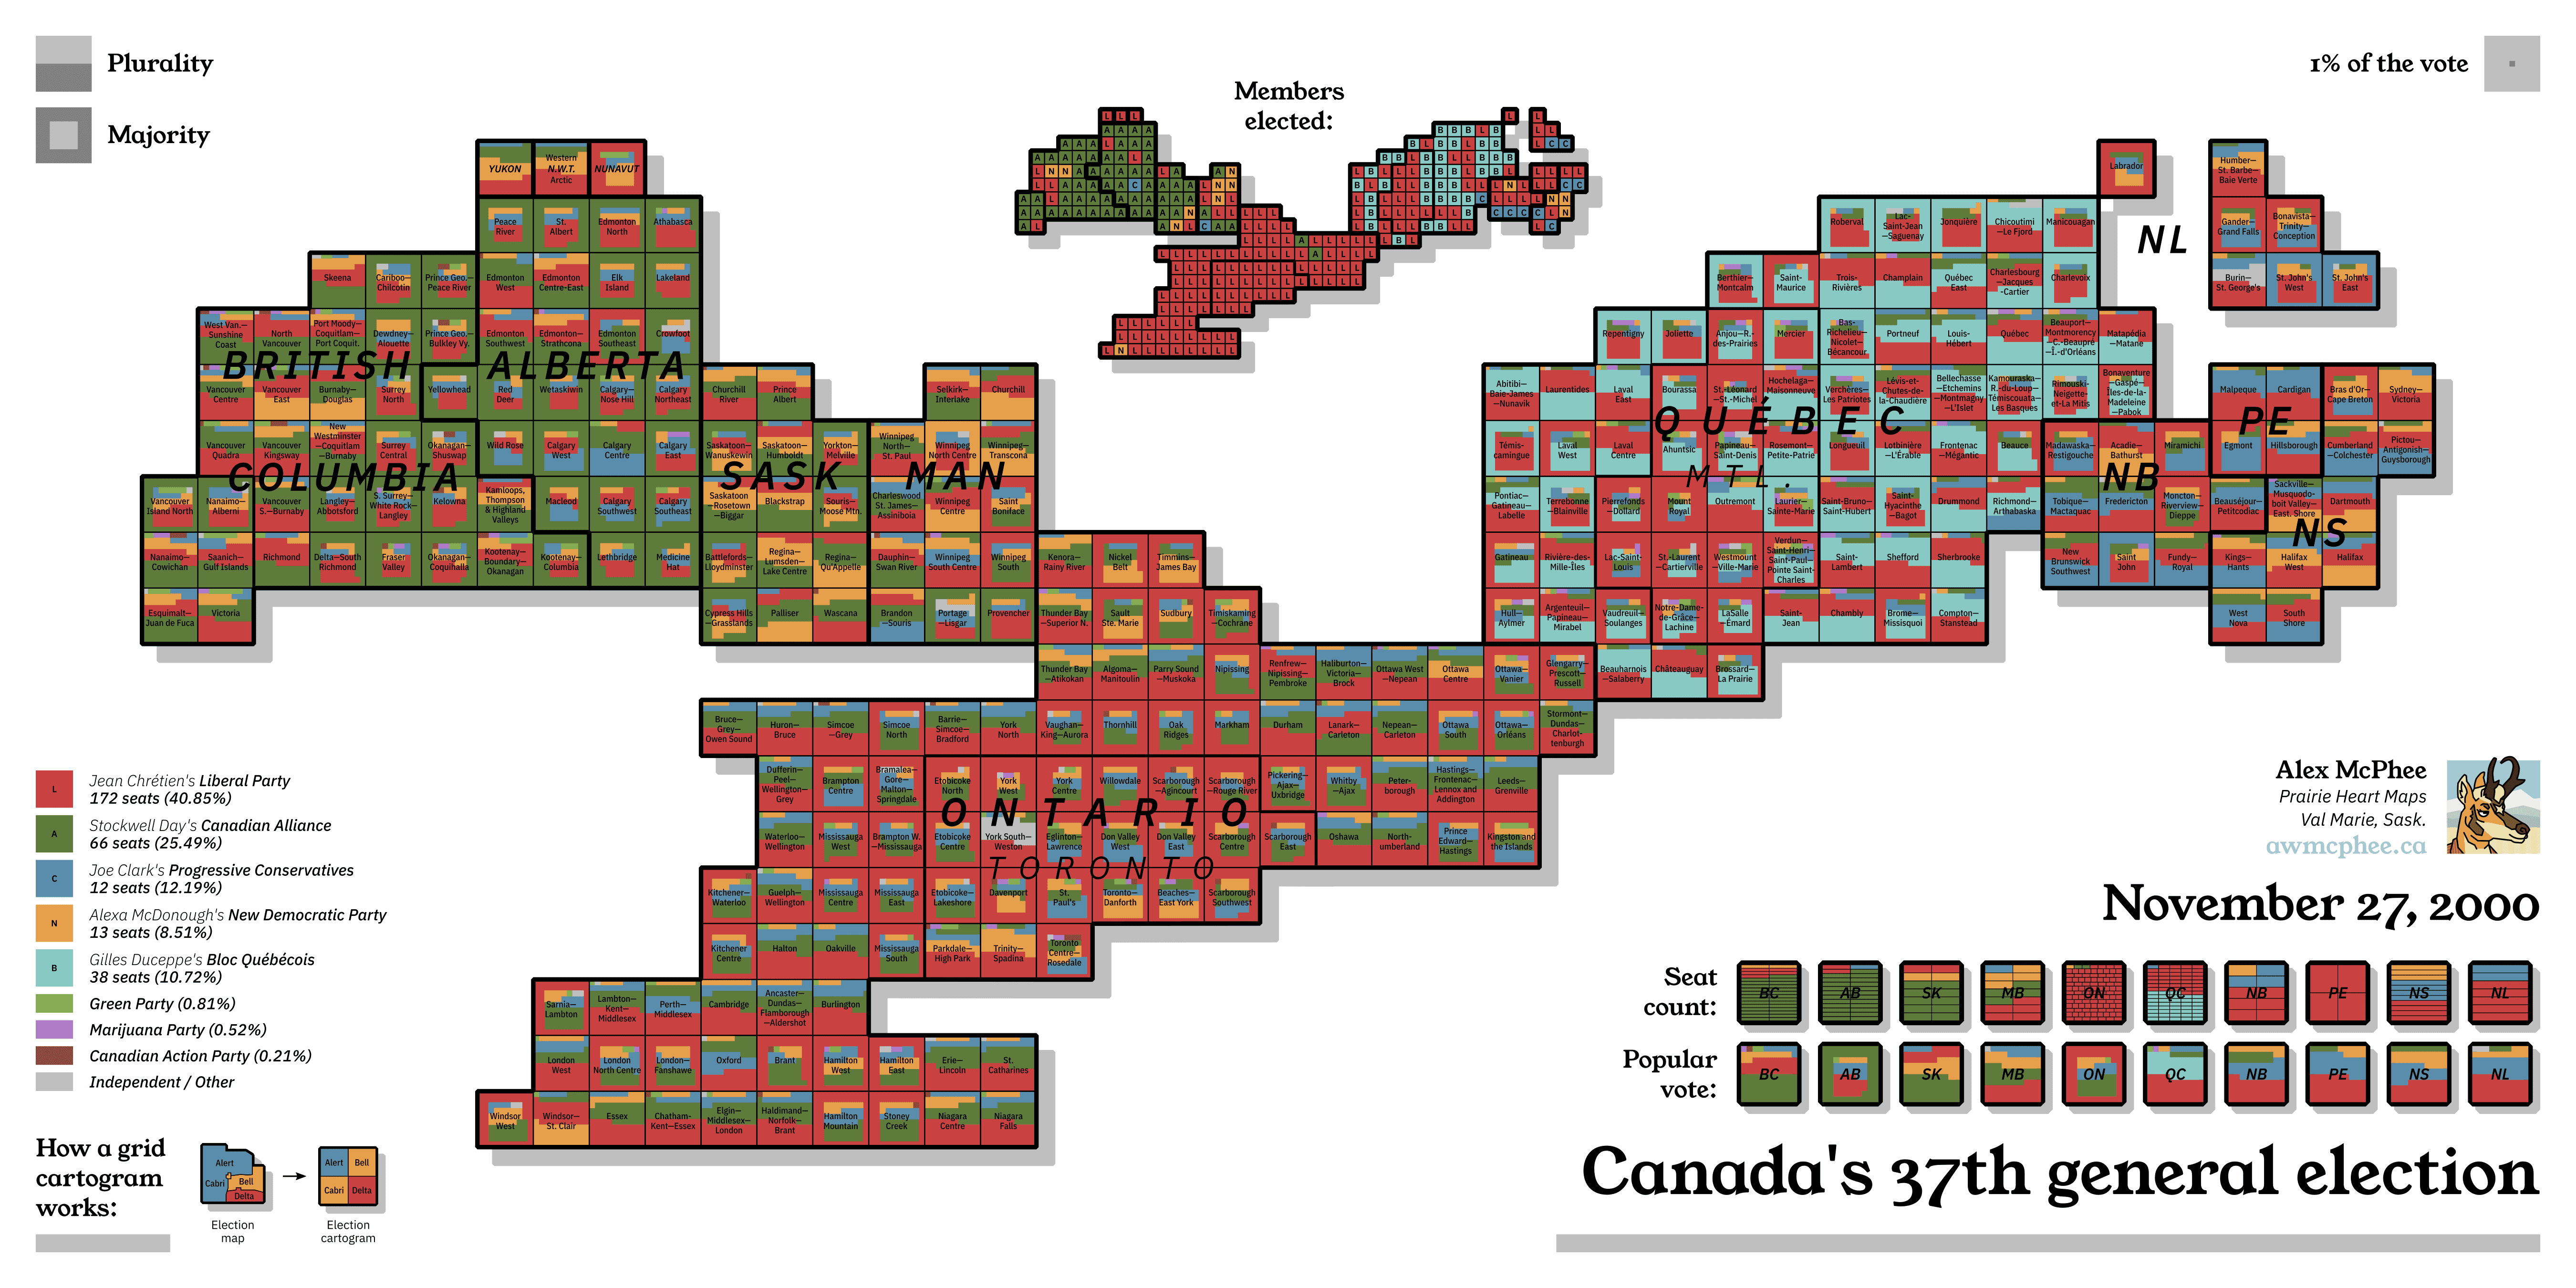 A grid cartogram depicting the popular vote in the 2000 Canadian election.